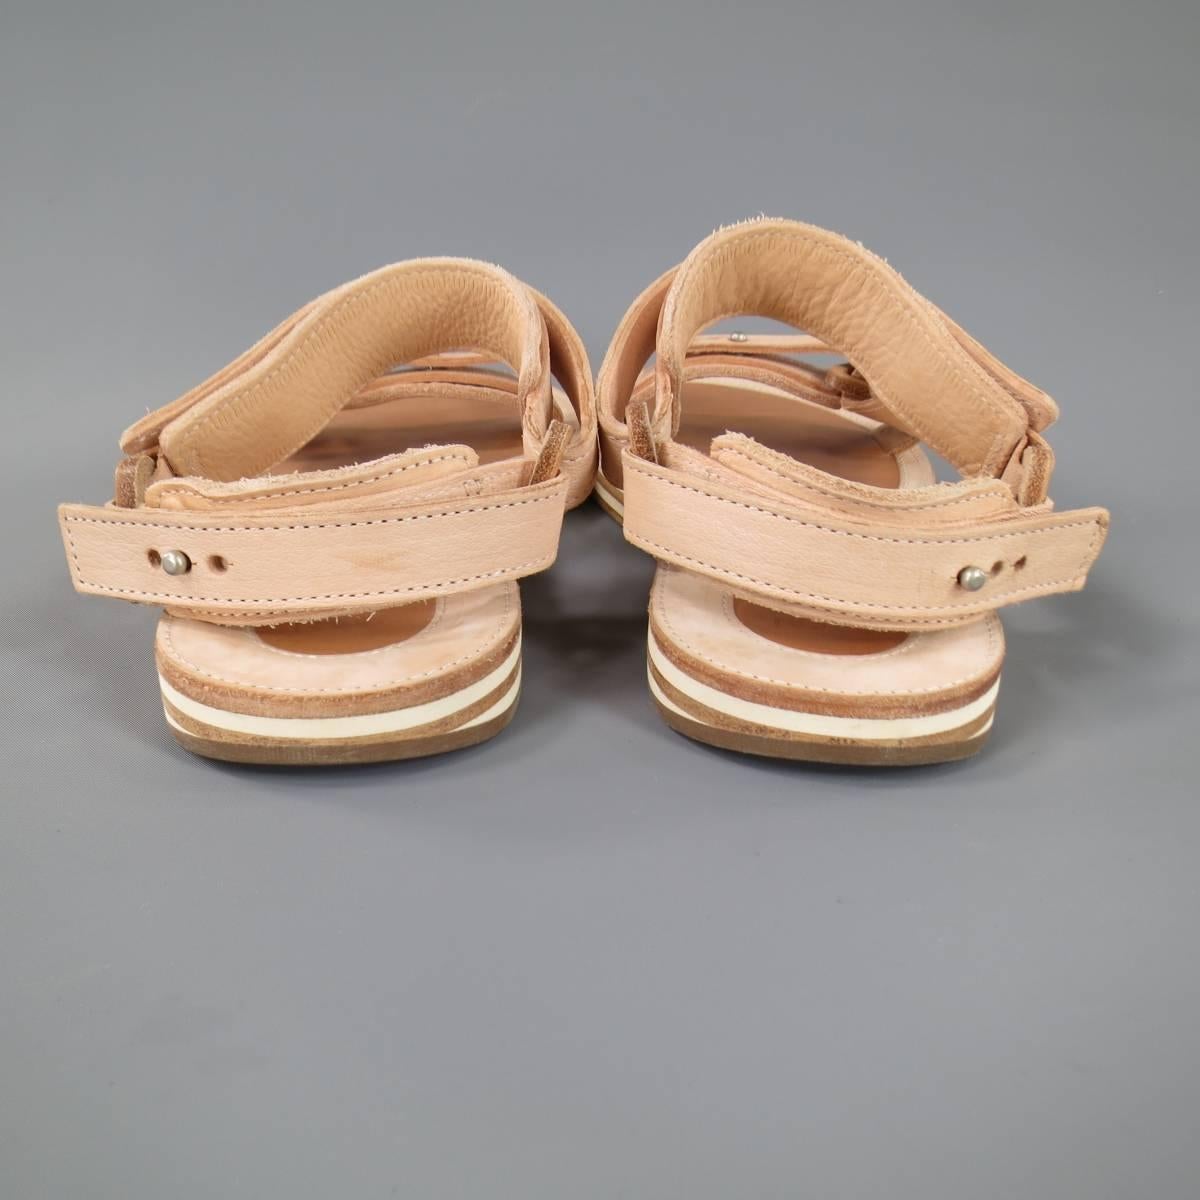 These SACAI X HENDER SCHEME sandals come in peachy beige natural Patina leather that ages and changes color with wear and features cross over toe and ankle adjustable harness straps with button studs and a stacked leather sole. With Dust Bags. Made